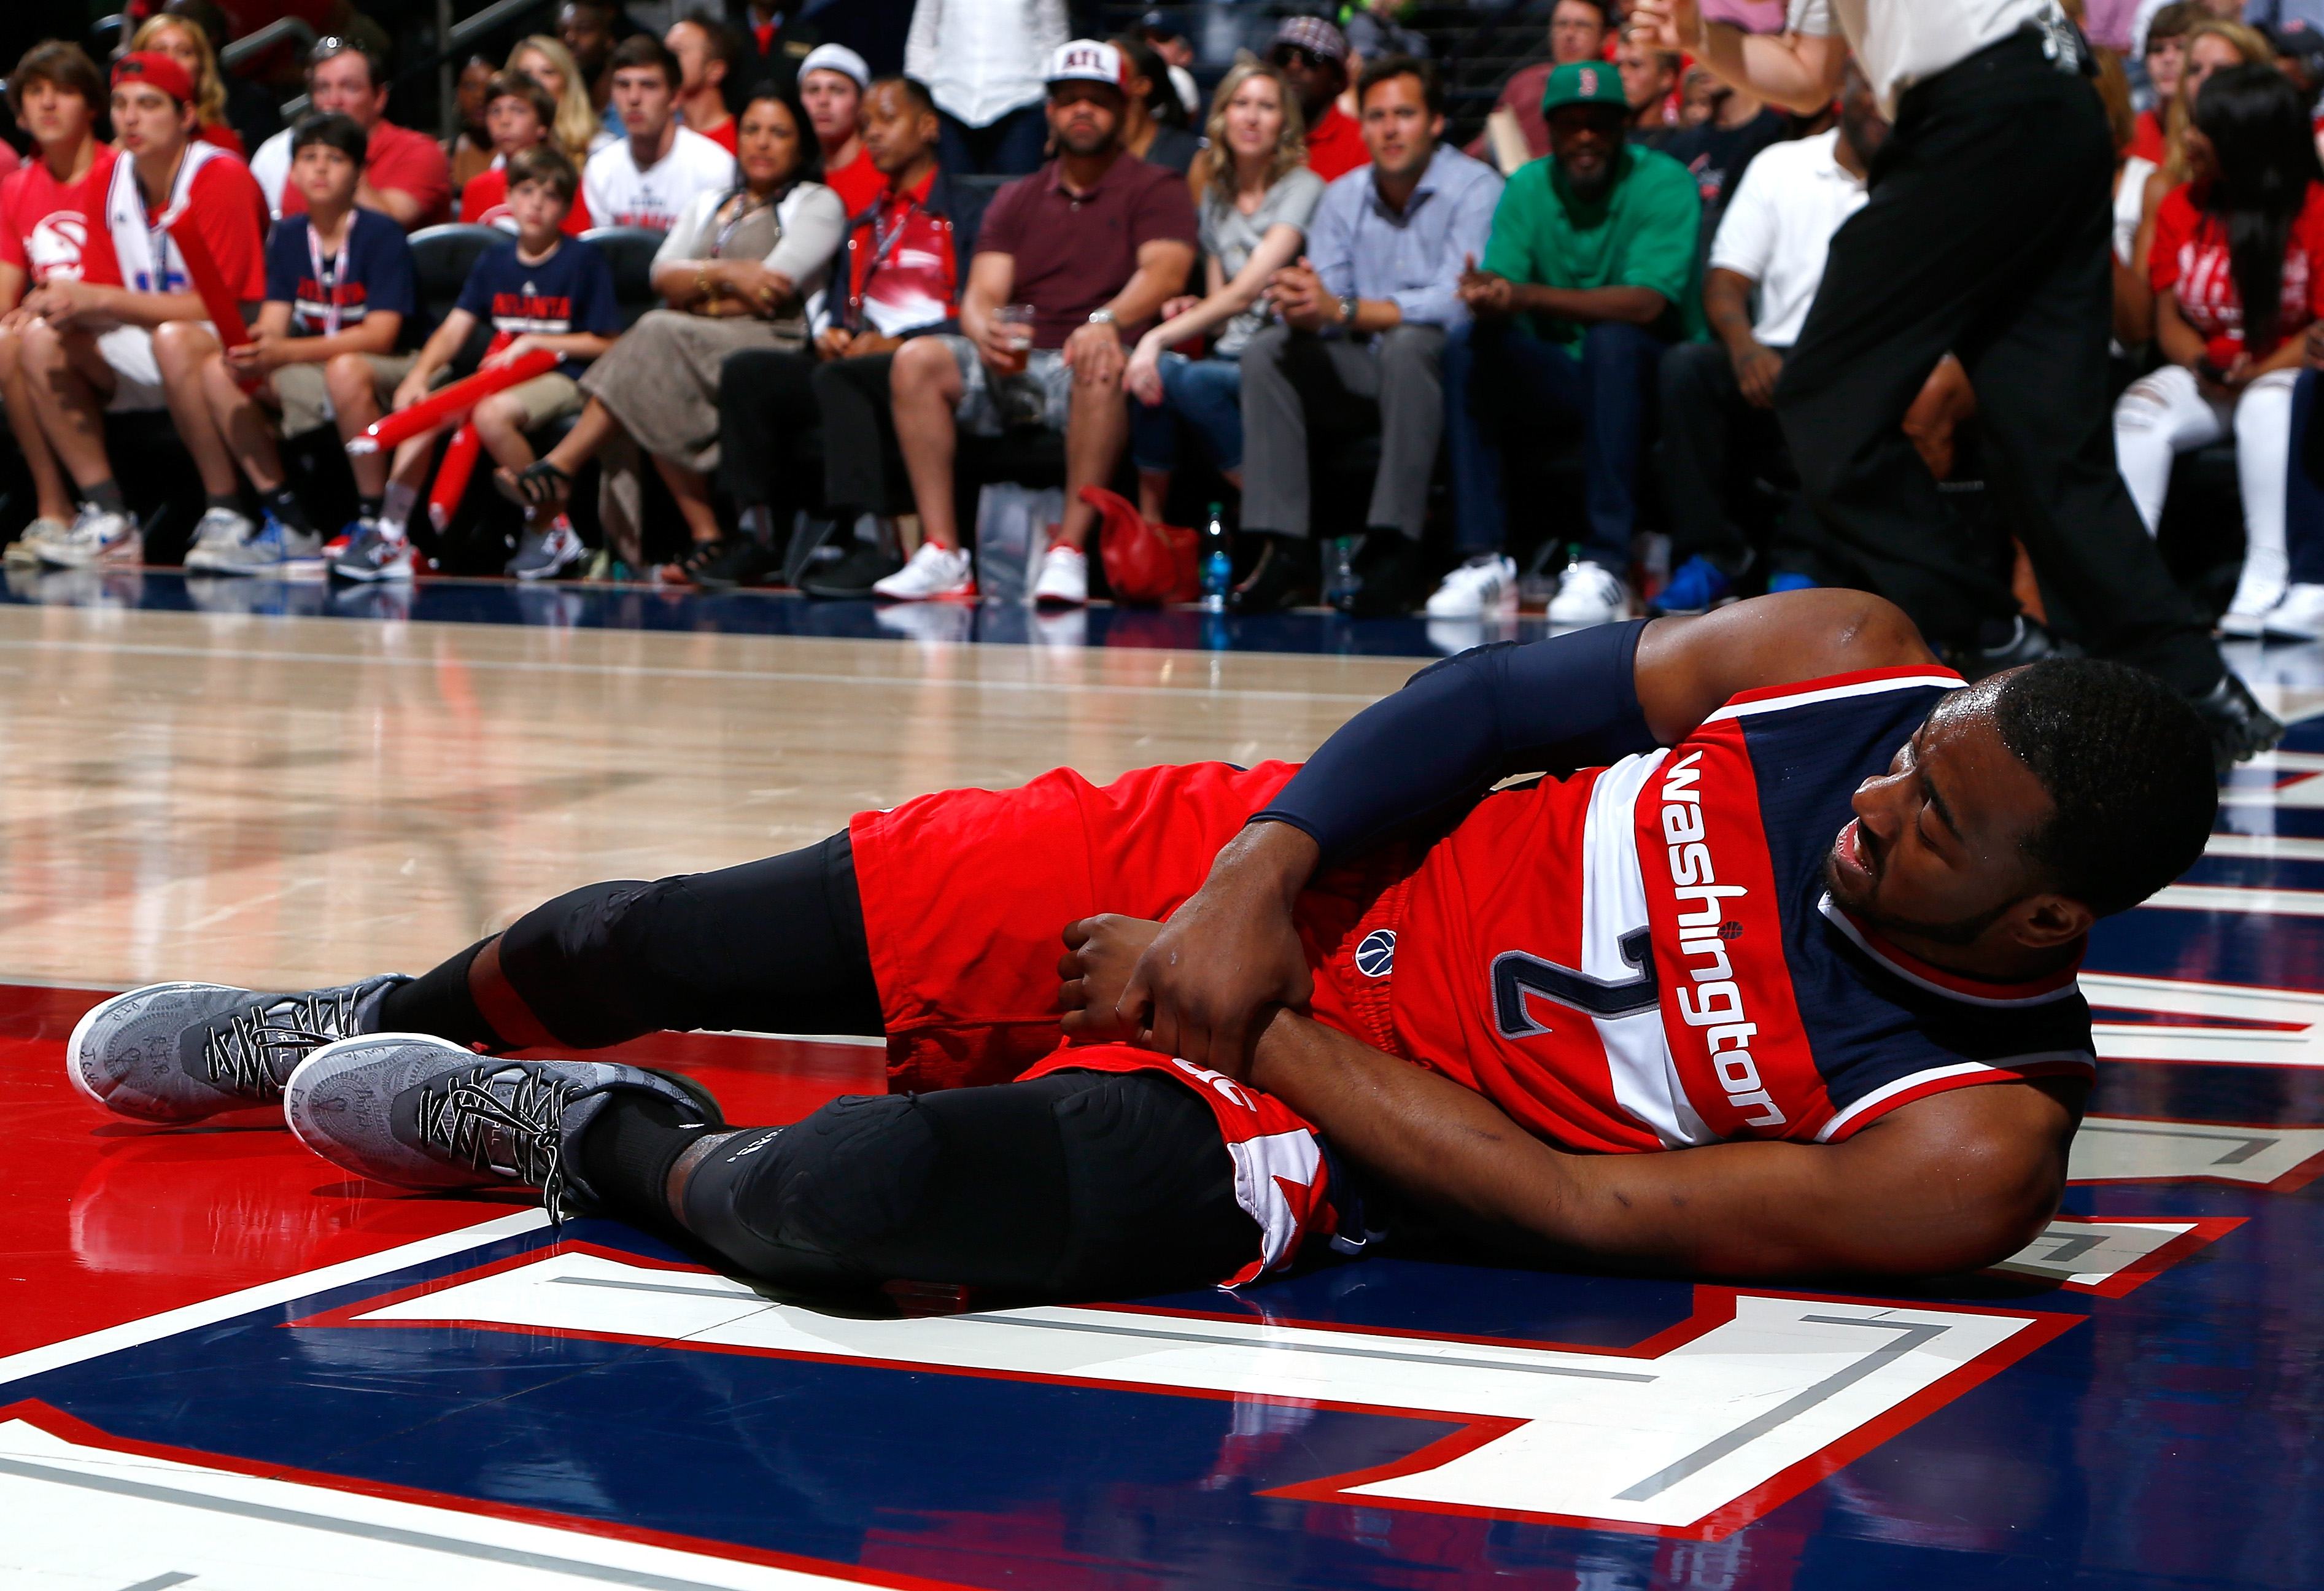 John Wall grabs his wrist after hitting the floor in Game 1. (Kevin C. Cox/Getty Images)